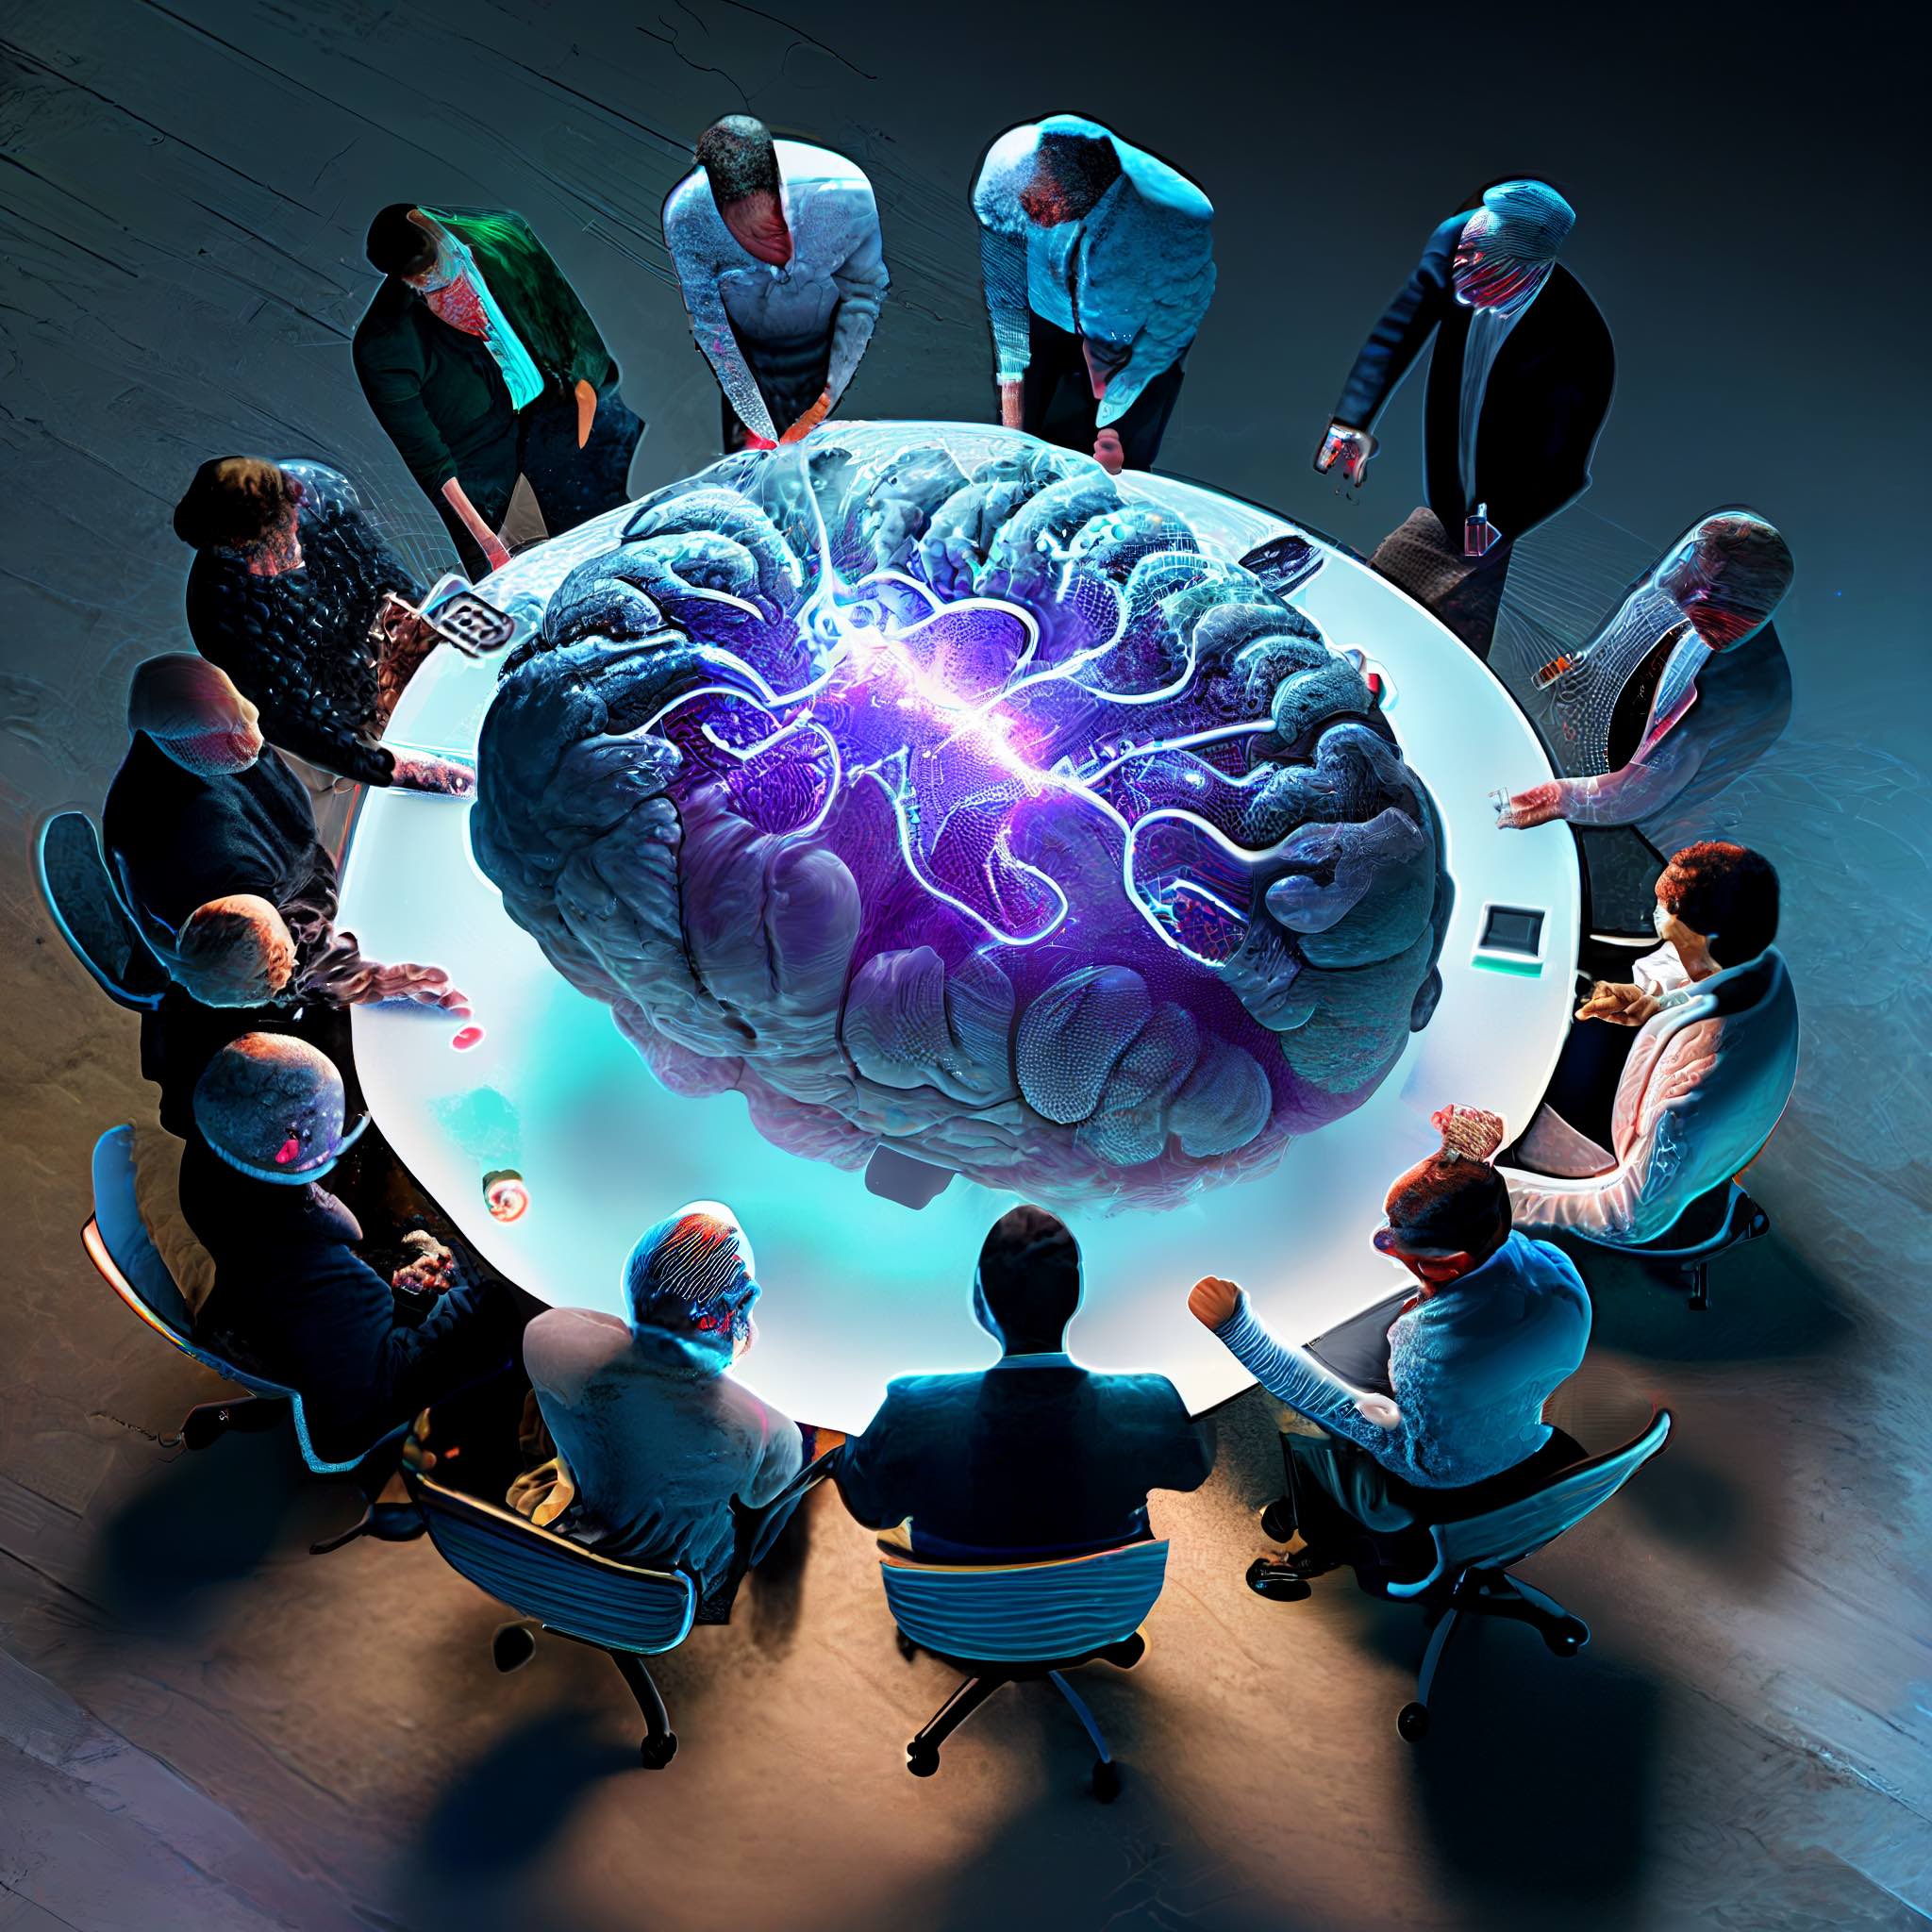 Computational Neuroscience: gather at a round table examining a glowing 3d hologram of a large human brain